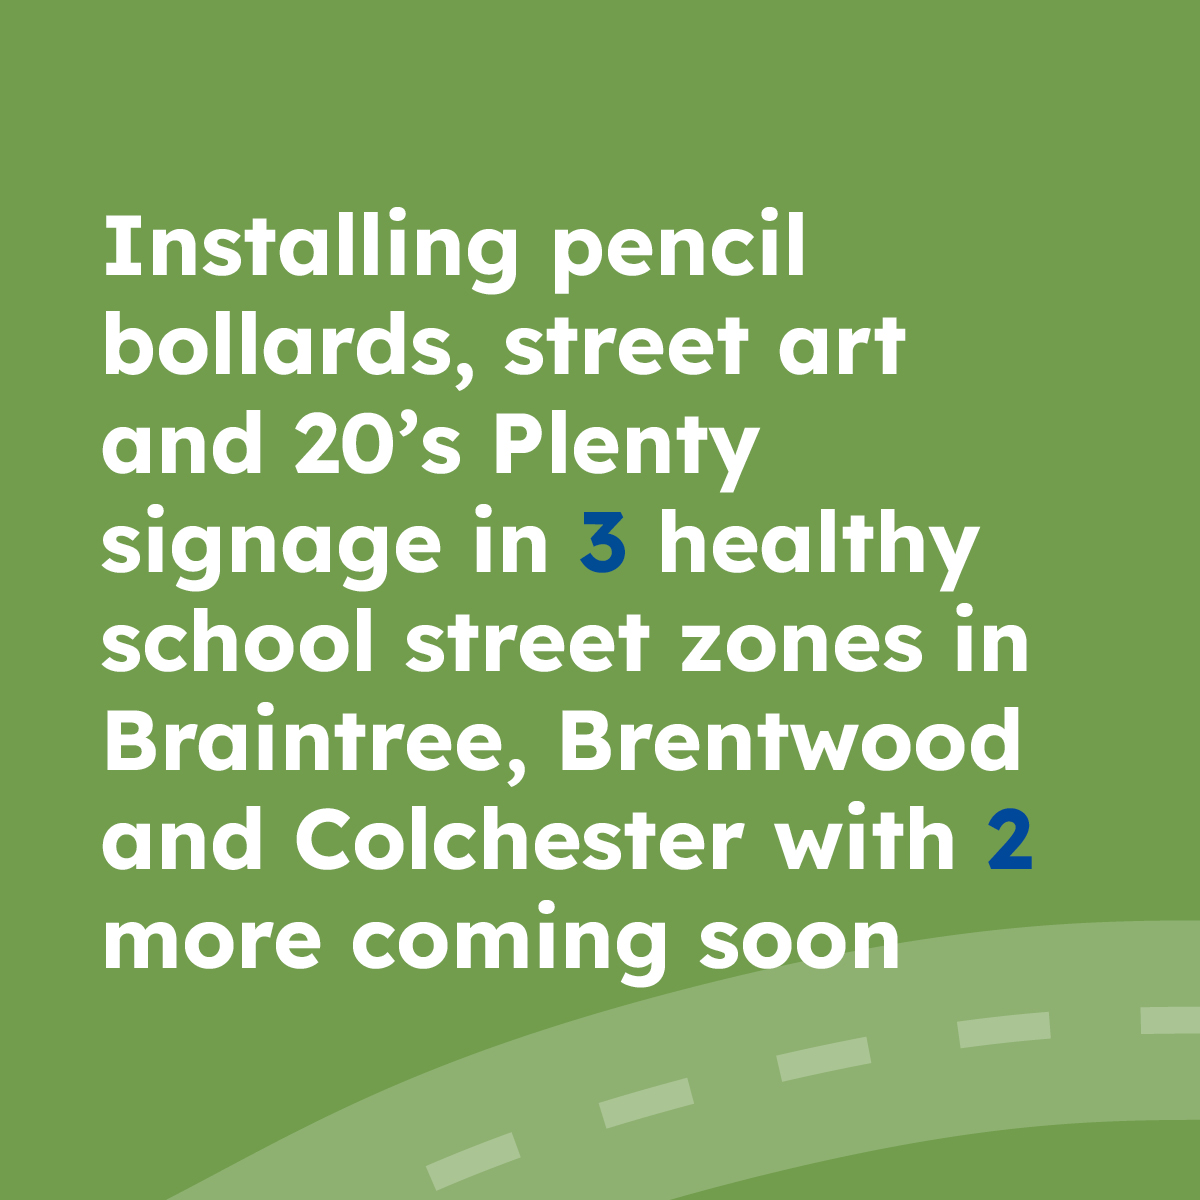 Installed pencil bollards, street art and 20's Plenty signage in 3 healthy school street zones in Braintree, Brentwood and Colchester with 2 more coming soon